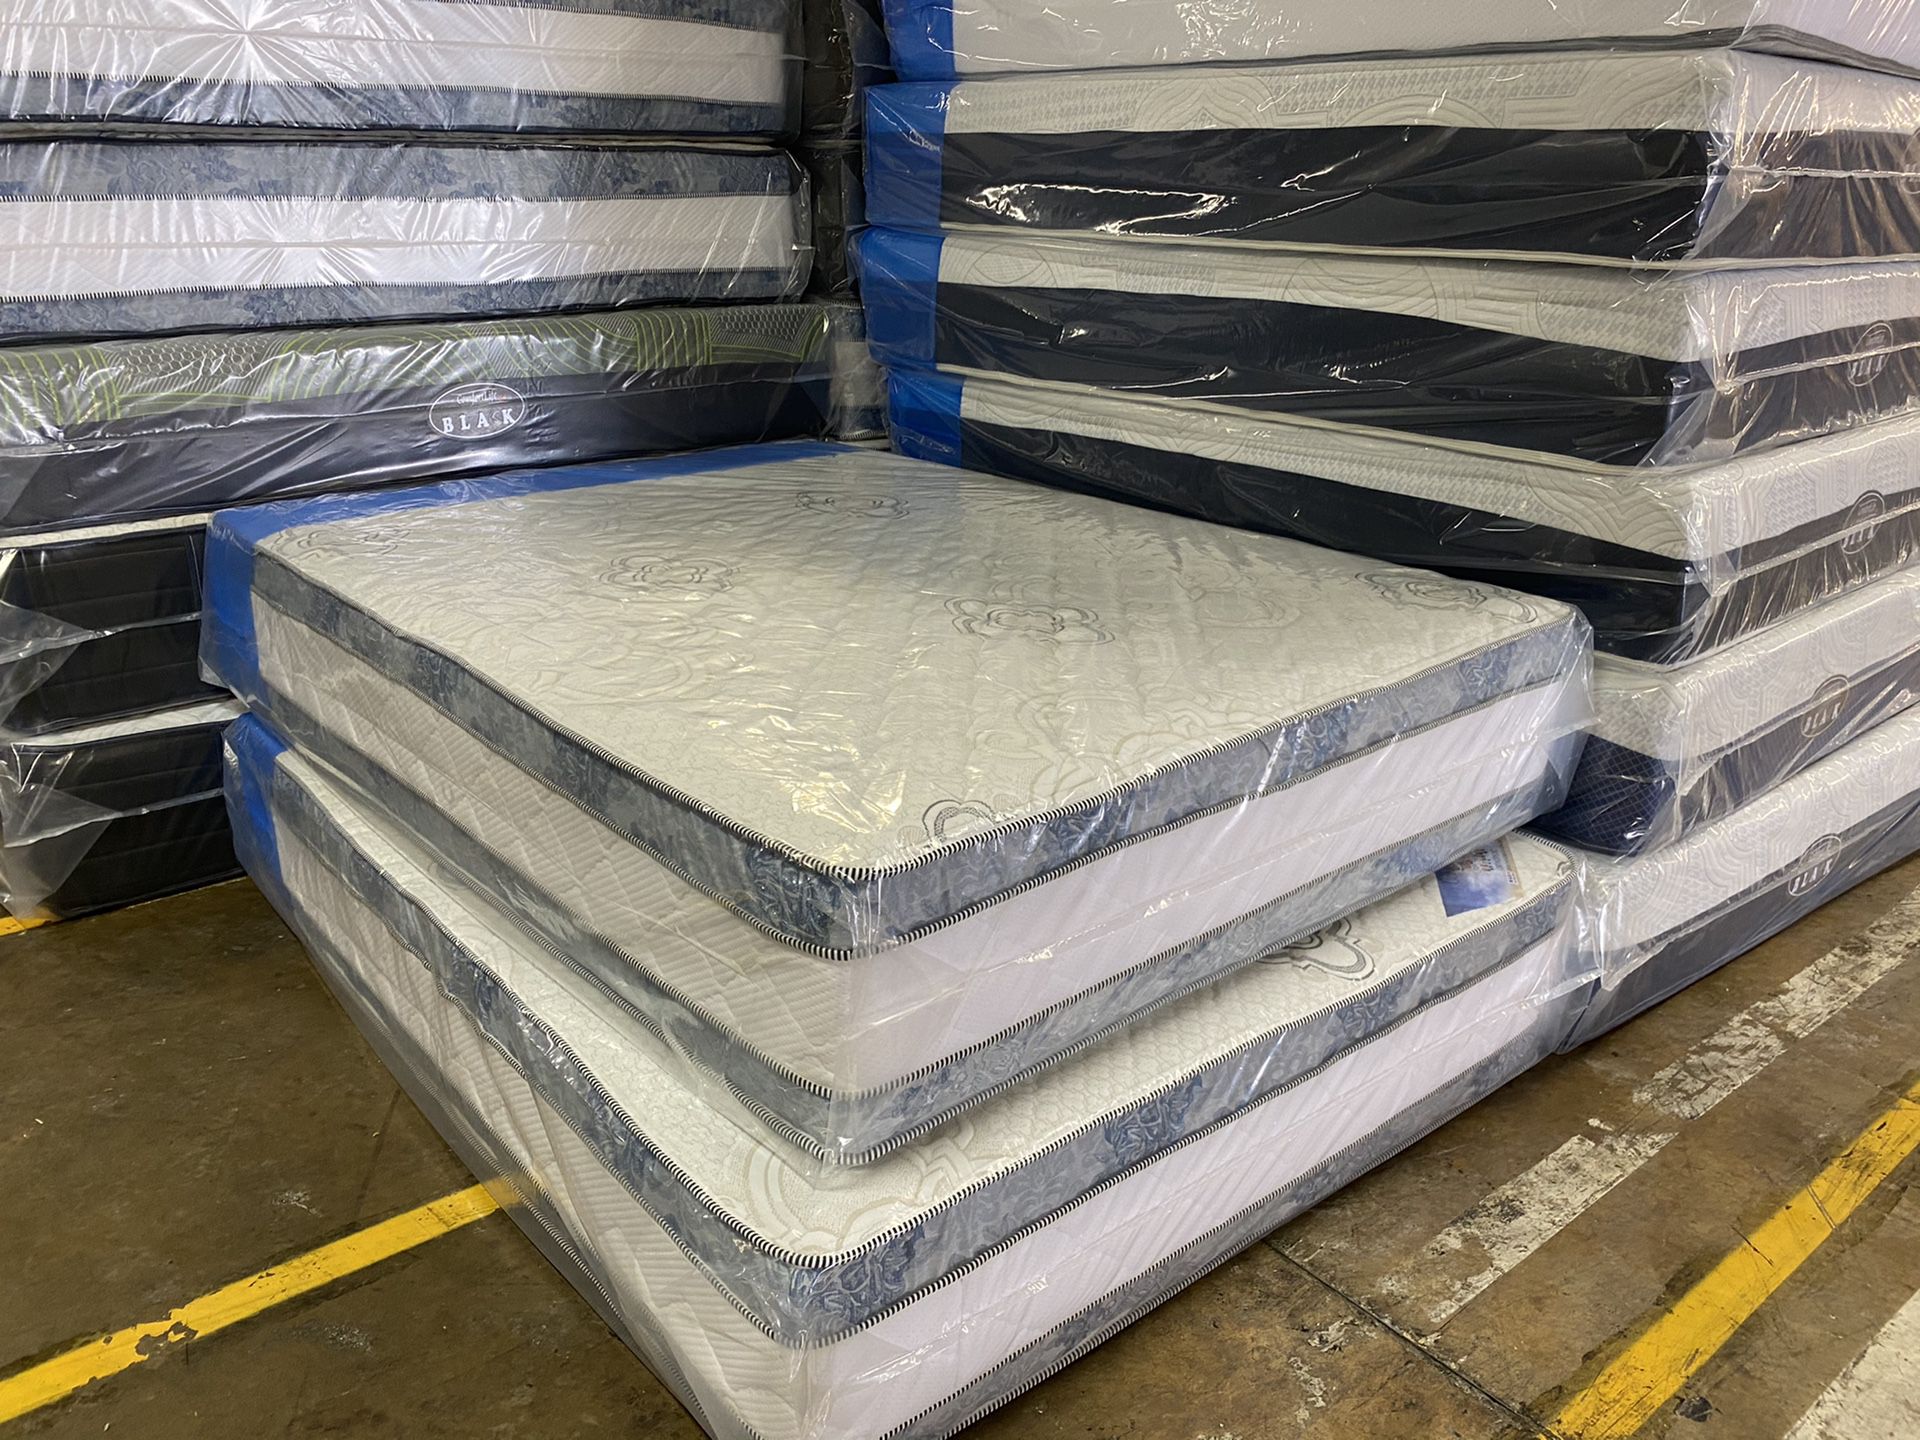 Queen Mattress - Double Side - 16 inch - come with box spring - Available Delivery